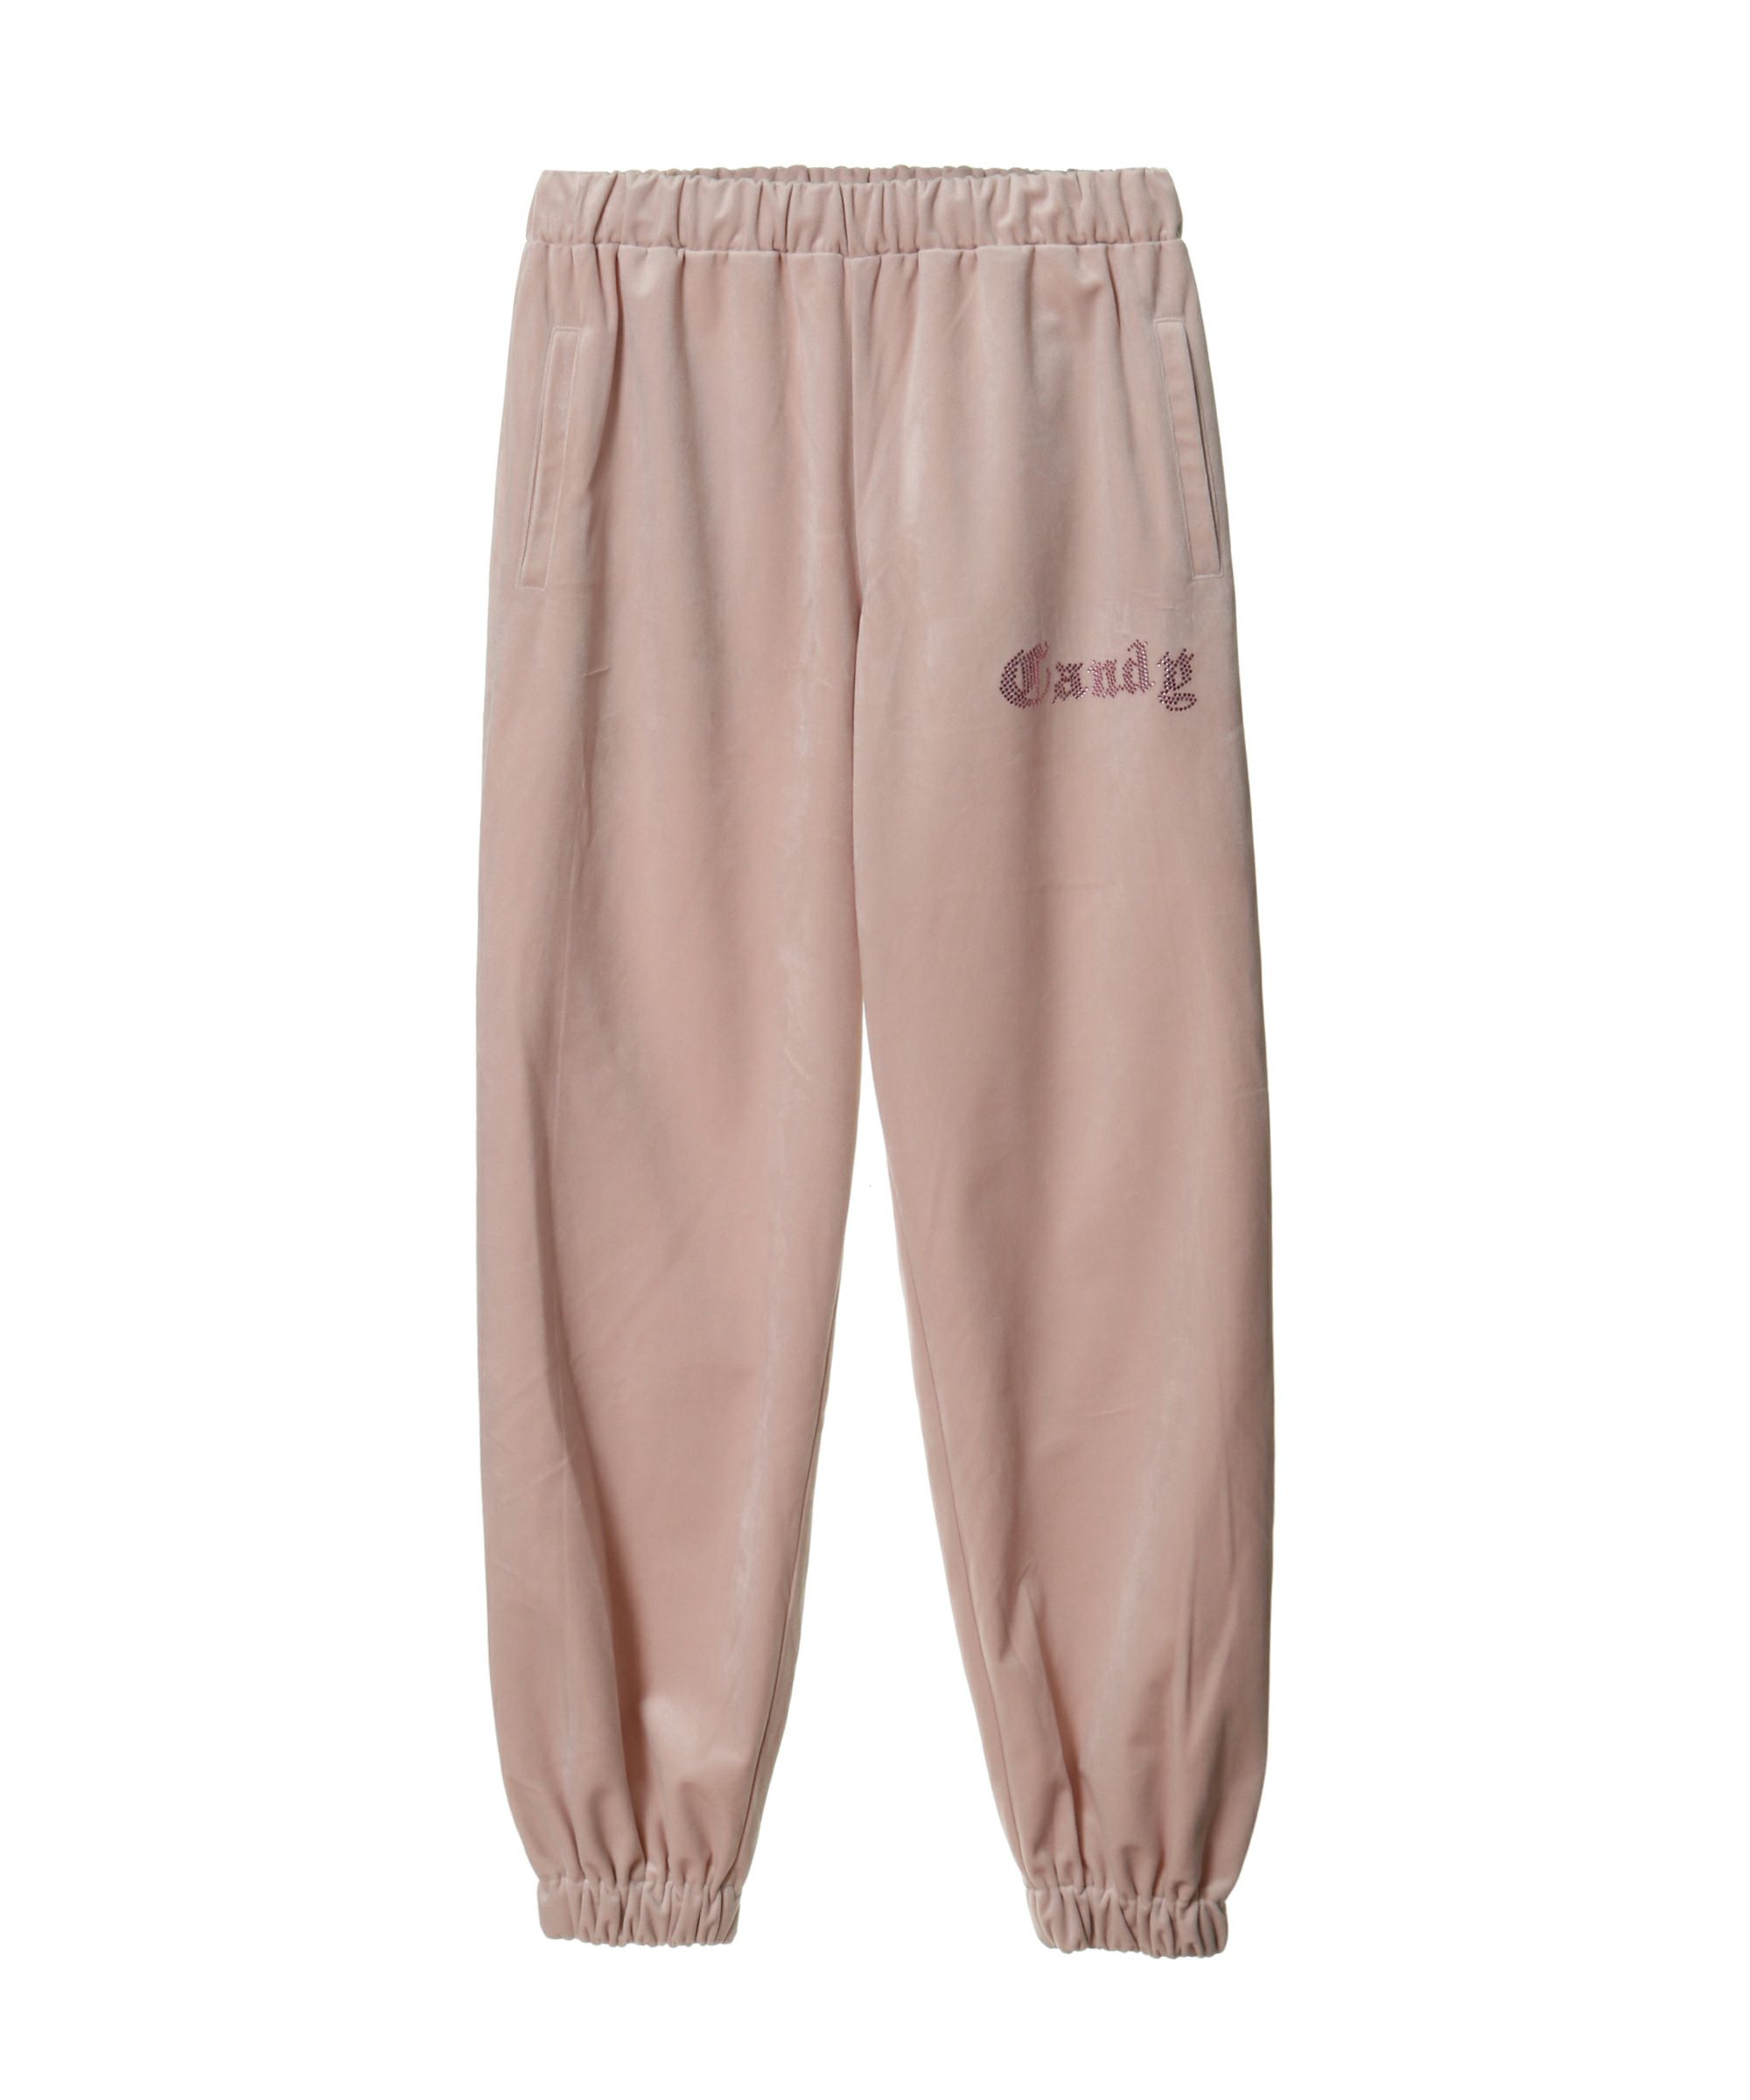 CANDY TRACK PANTS